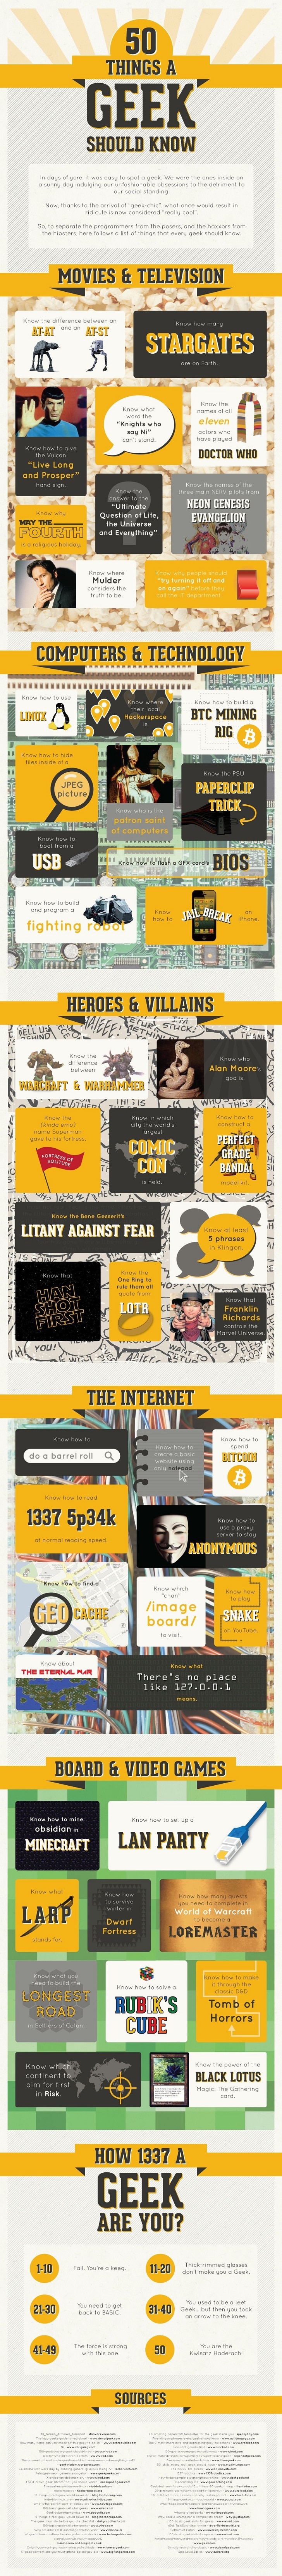 the-ultimate-geek-test-infographic